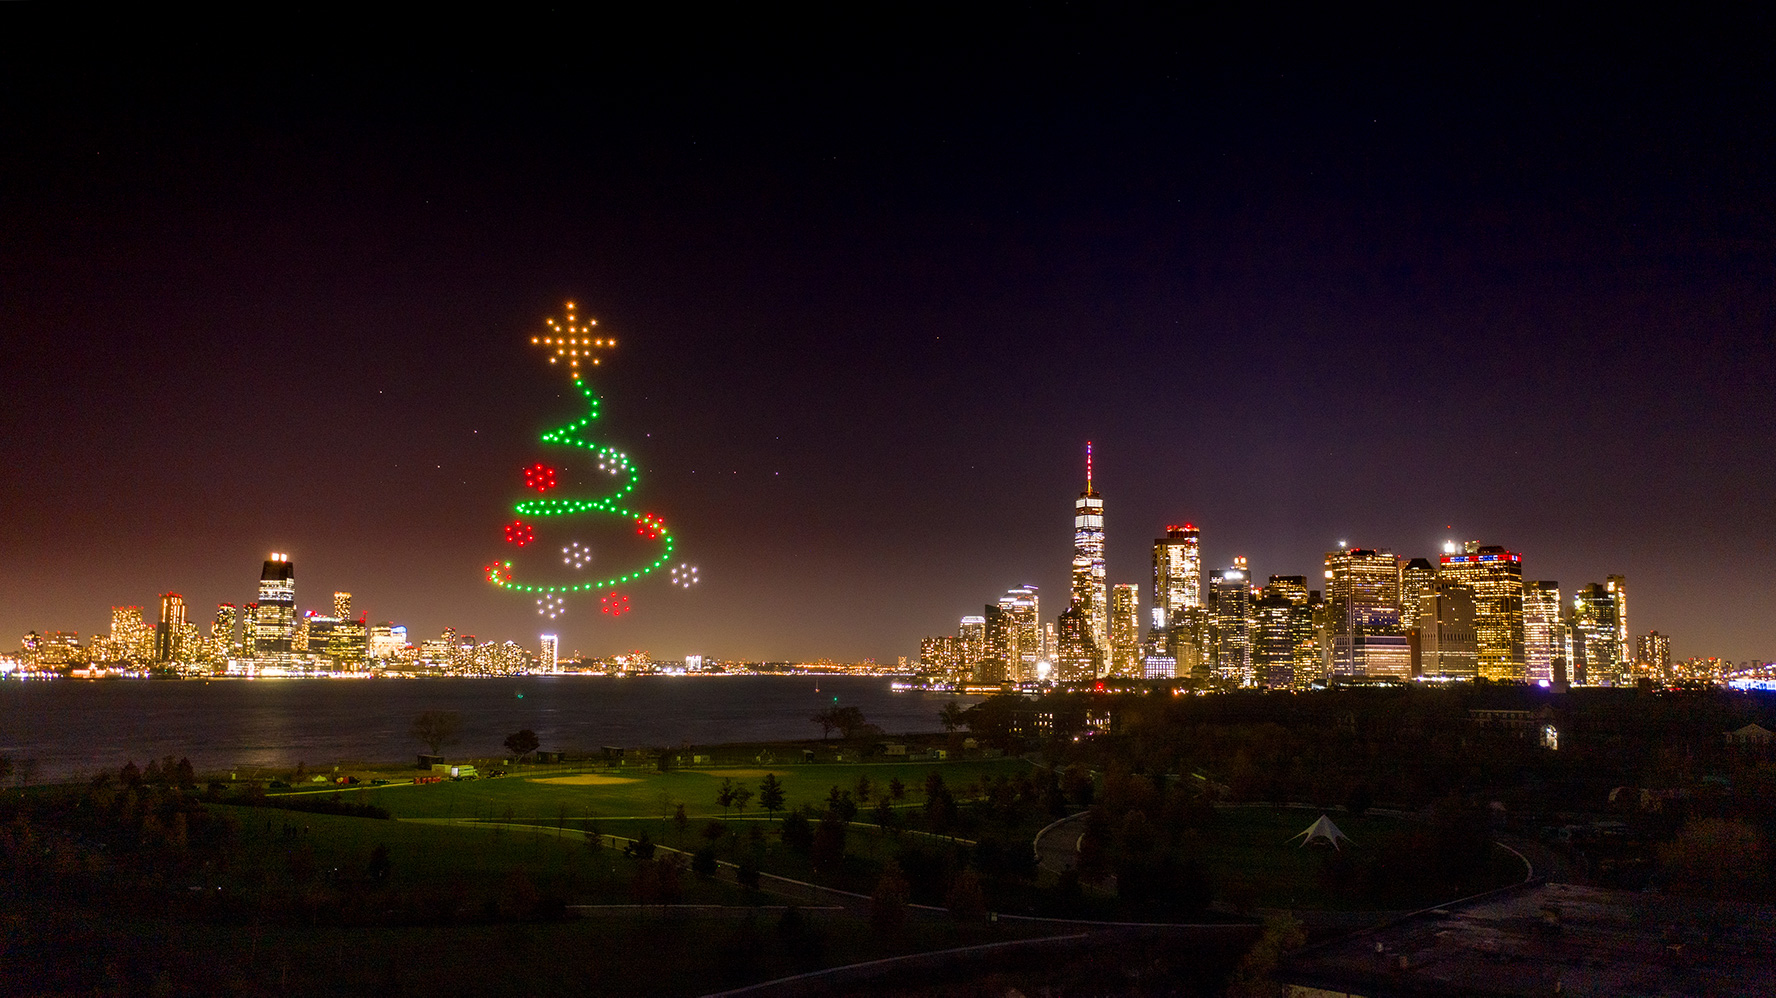 iHeartMedia launched its 1067 LITE FM Christmas season broadcasts with a spectacular drone show from Verge Aero